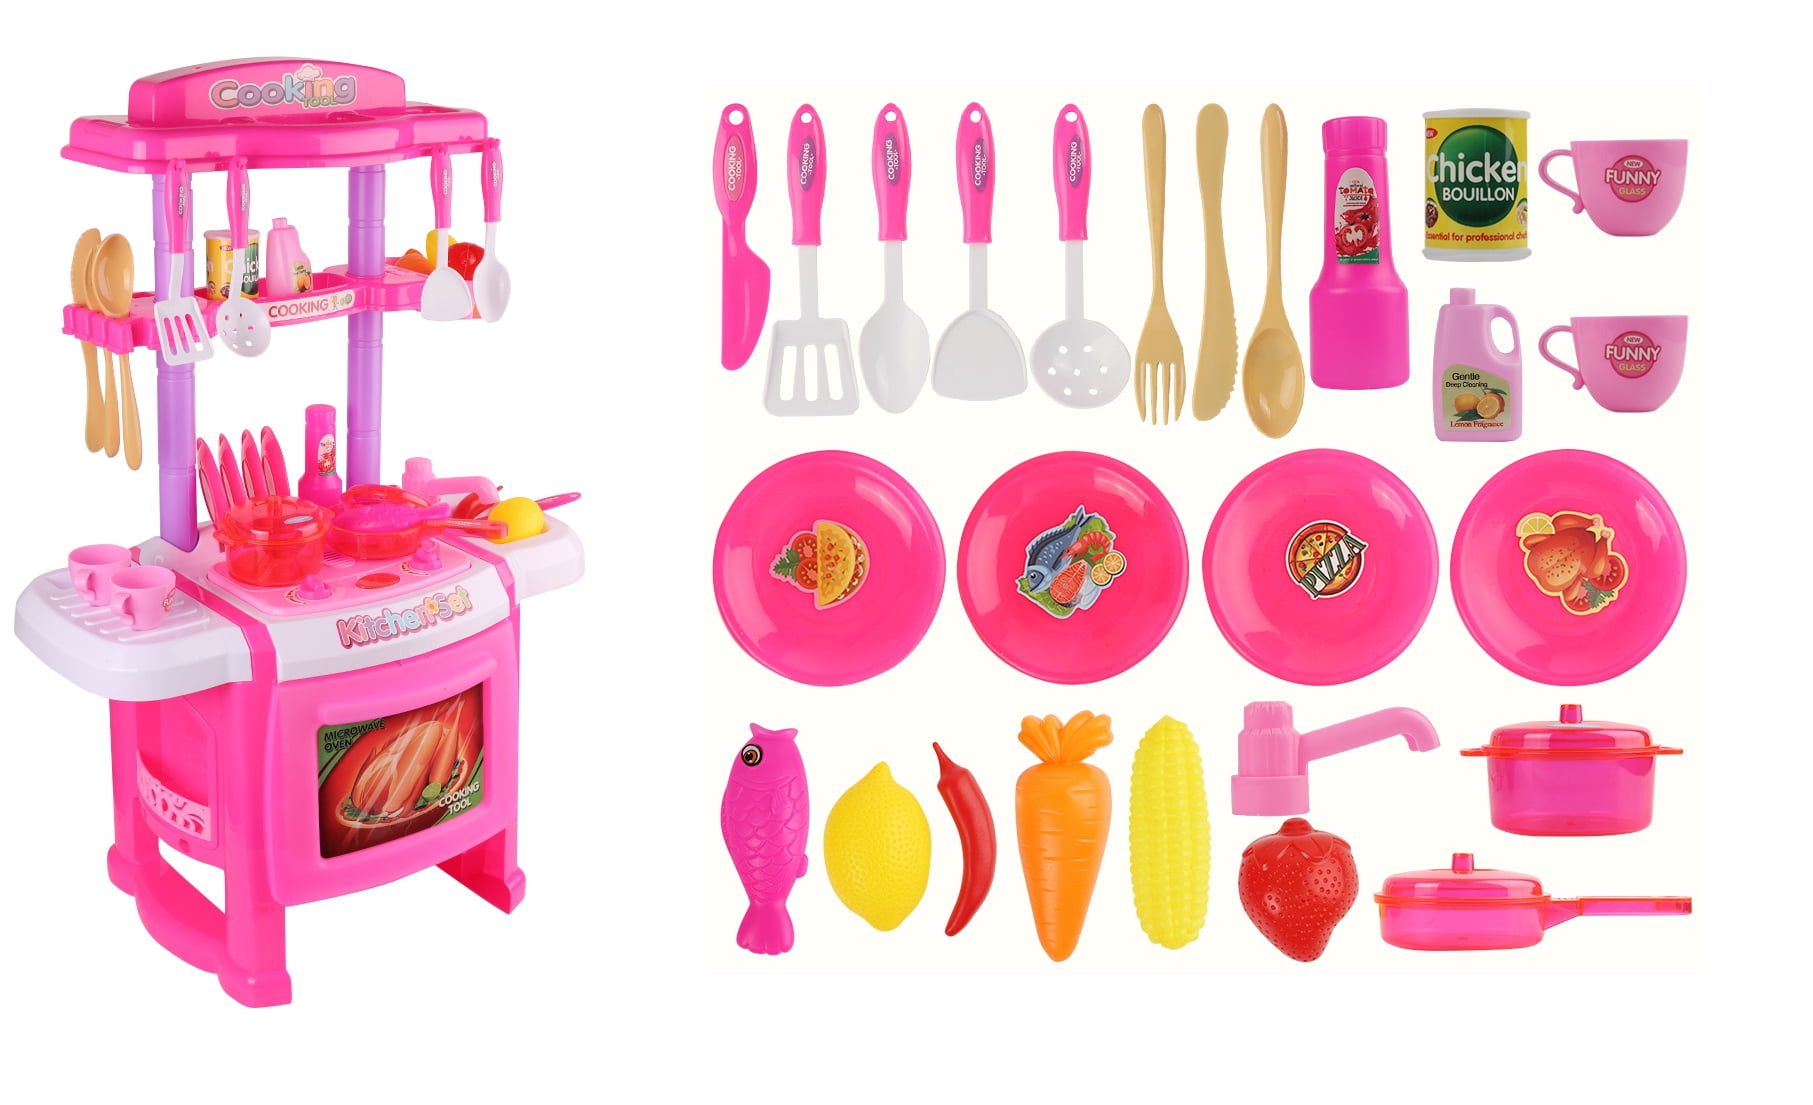 Chef Cook Occupation Fruit Salad Vegetable Kitchenware Pretend Play Girl Kid Toy 